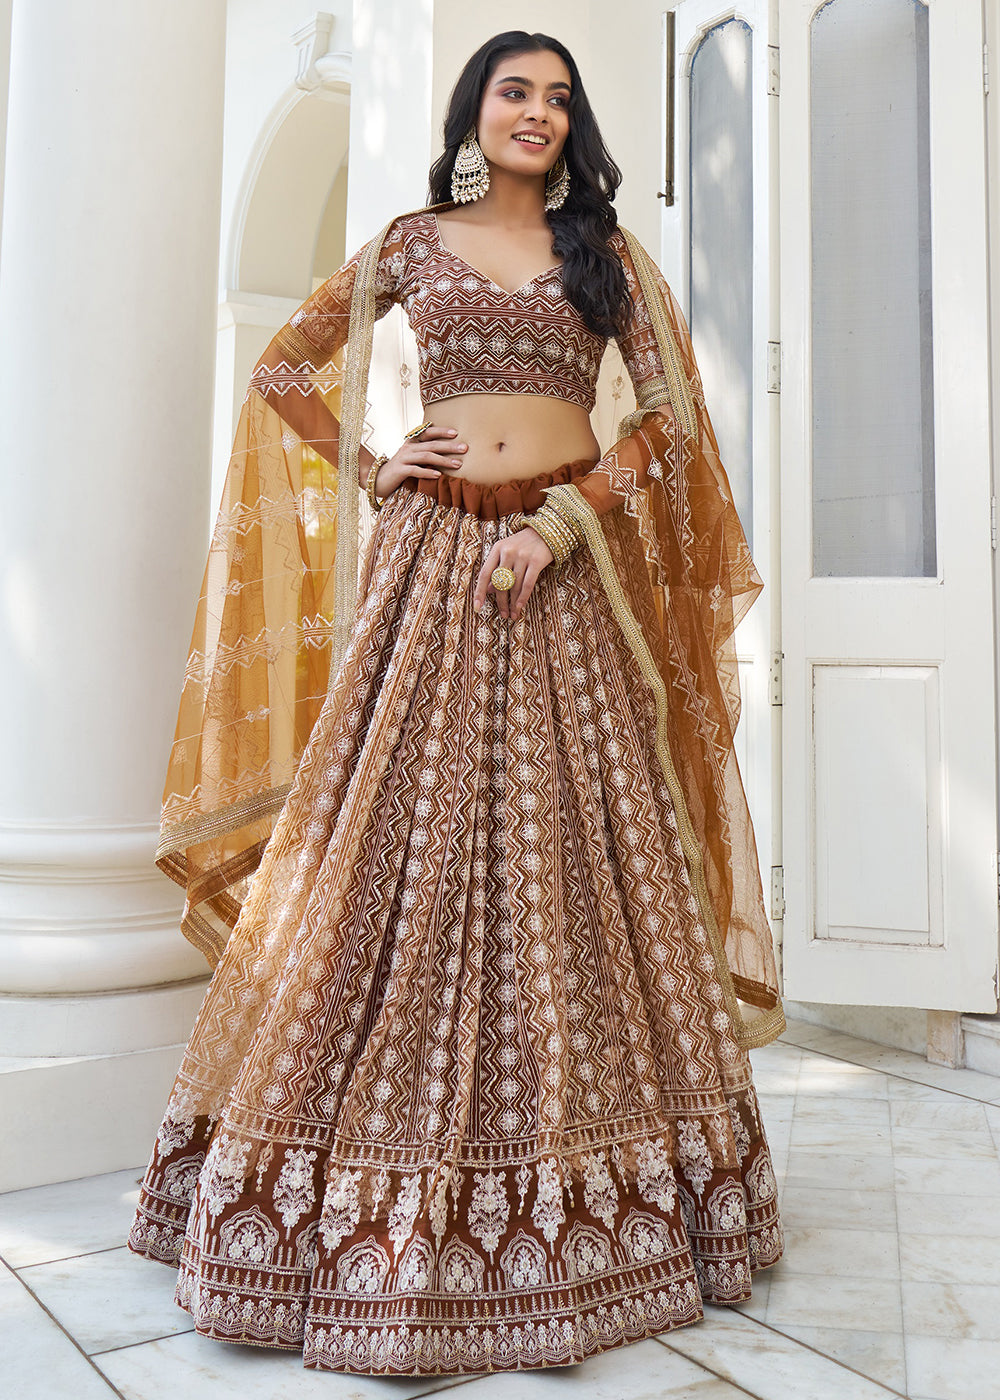 Buy Now Snuff Brown Net Embroidered Wedding Lehenga Choli Online in USA, UK, Canada & Worldwide at Empress Clothing. 